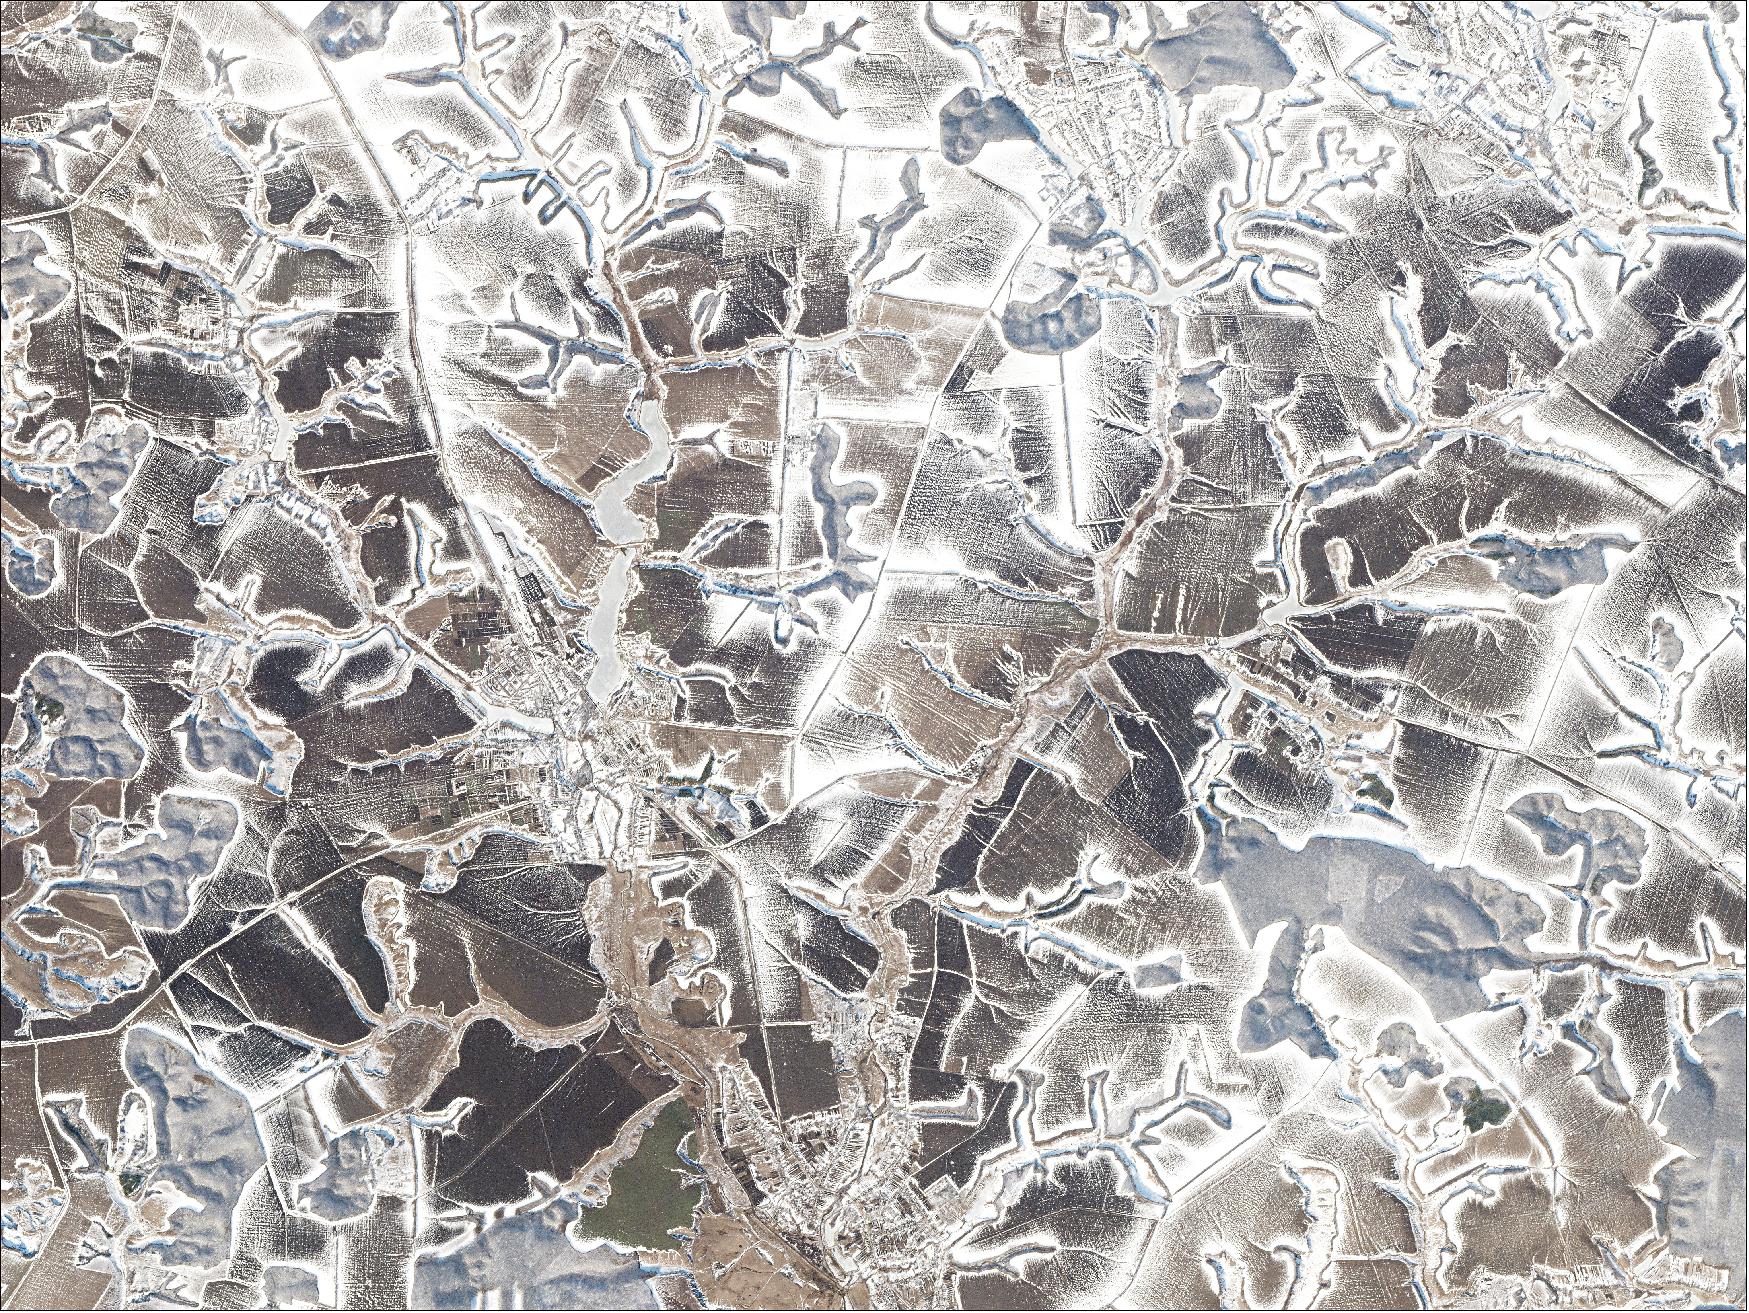 Figure 43: This Flock-1 image, acquired on 17 February 2016, shows icy fields during winter in Sumy Oblast, Ukraine (image credit: Planet Labs)